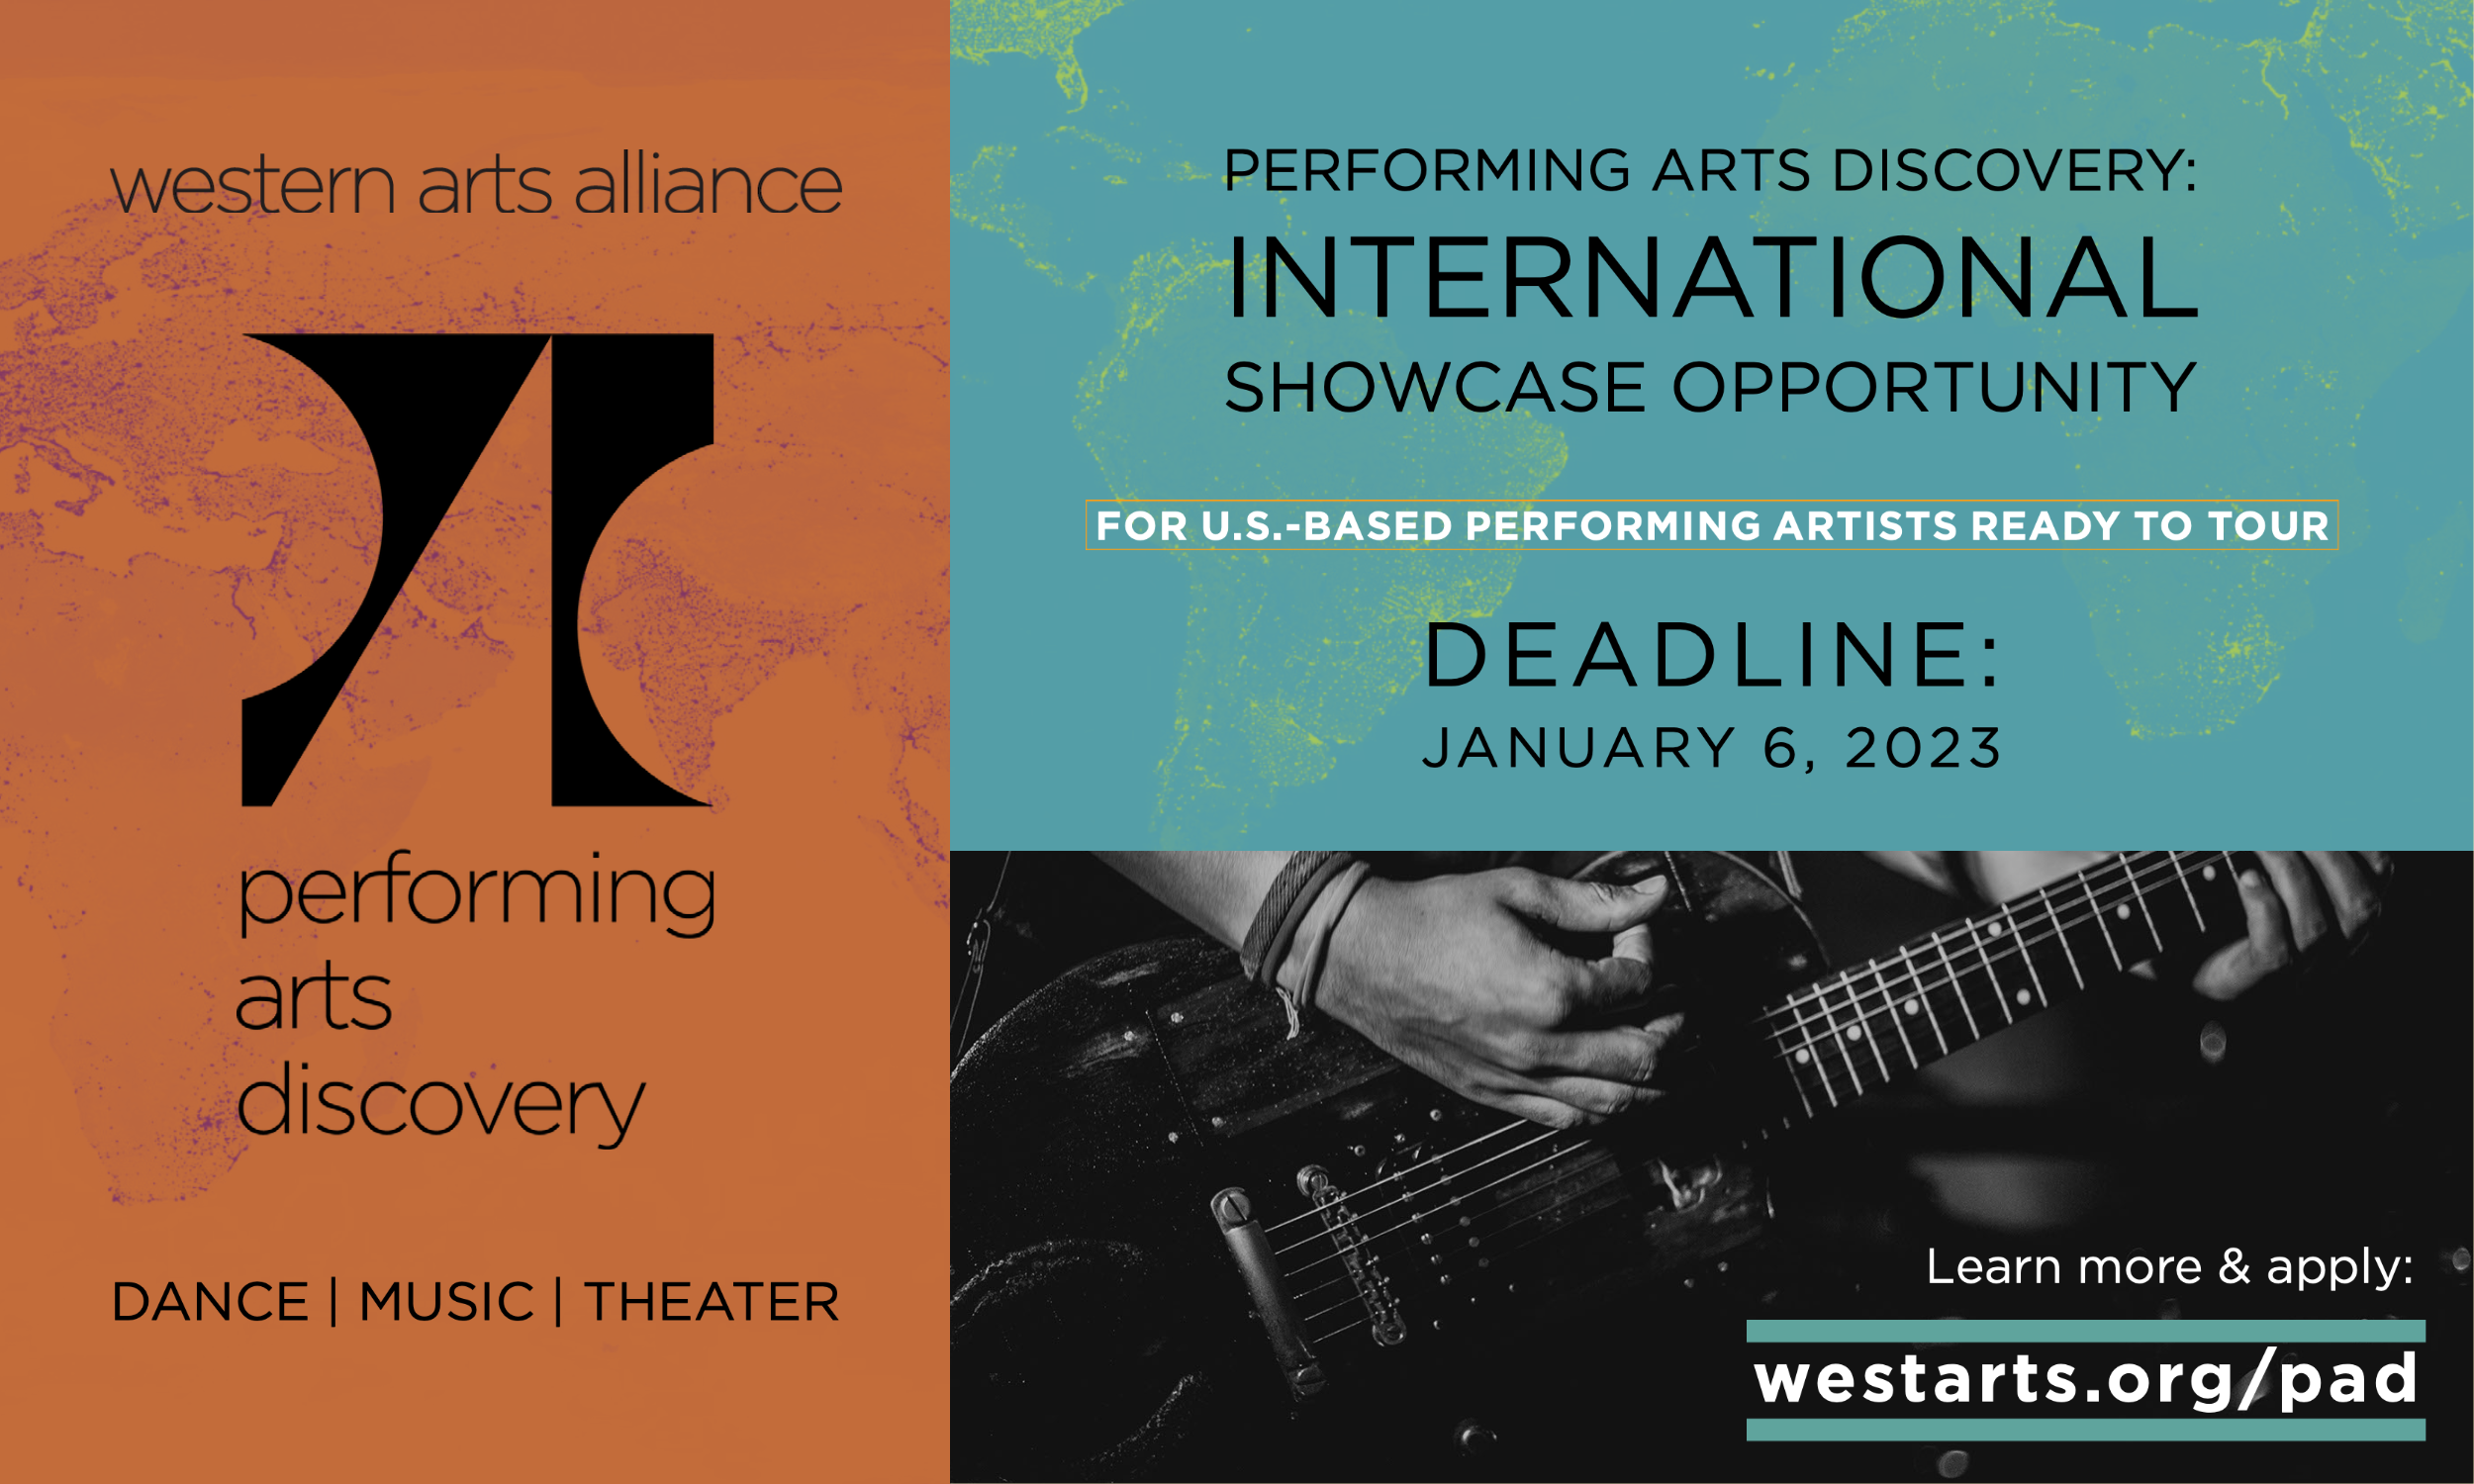 Performing Arts Discovery is seeking applicants for virtual programming opportunity. Deadline: January 6.